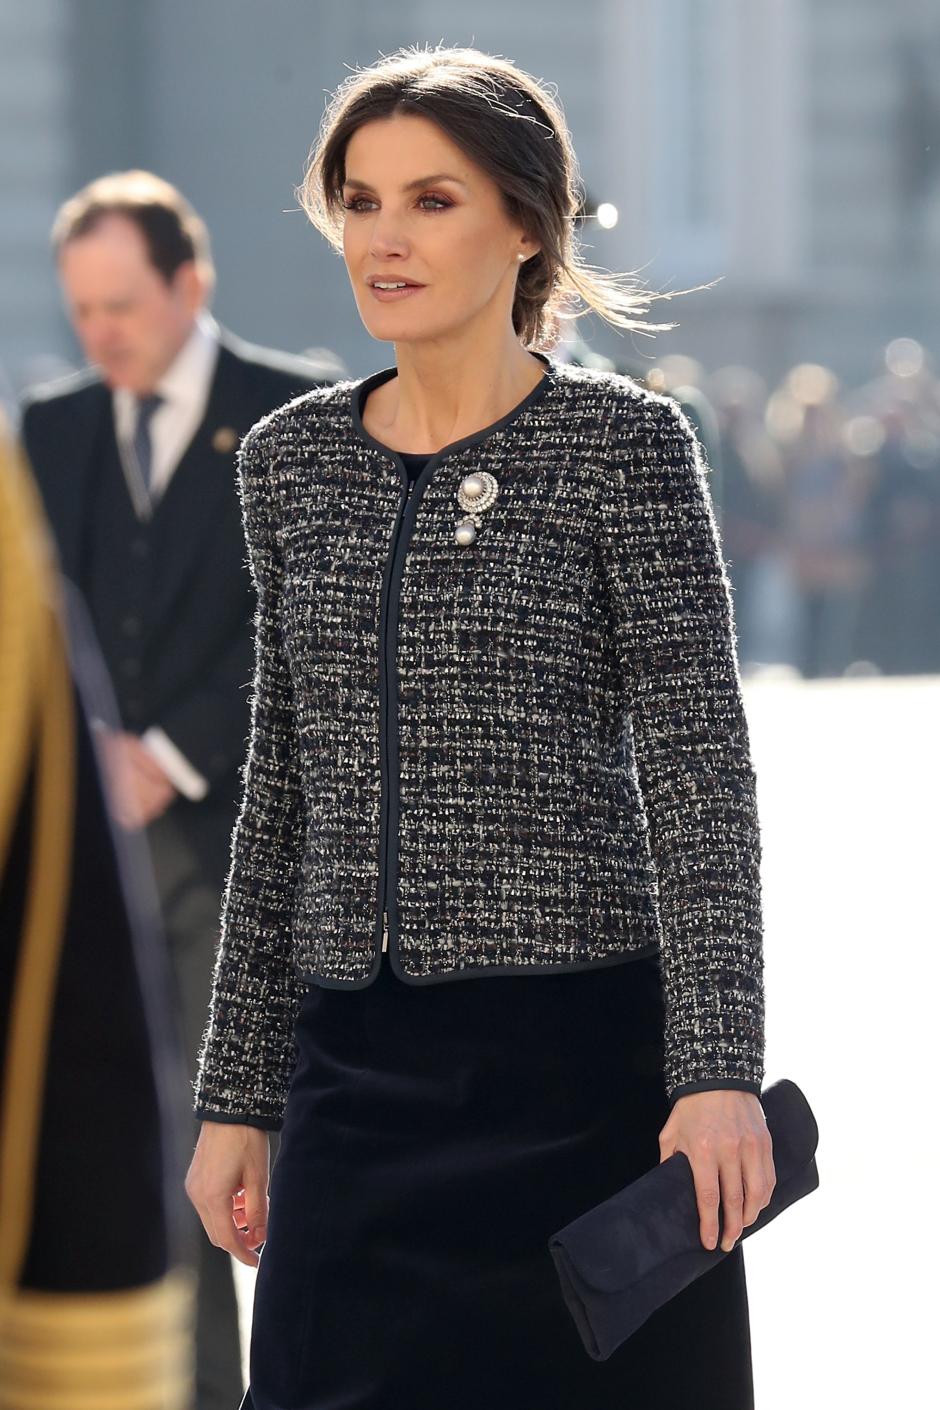 Spanish Queen Letizia during the Military Easter 2019 at RoyalPalace in Madrid on Sunday 6th January 2019.